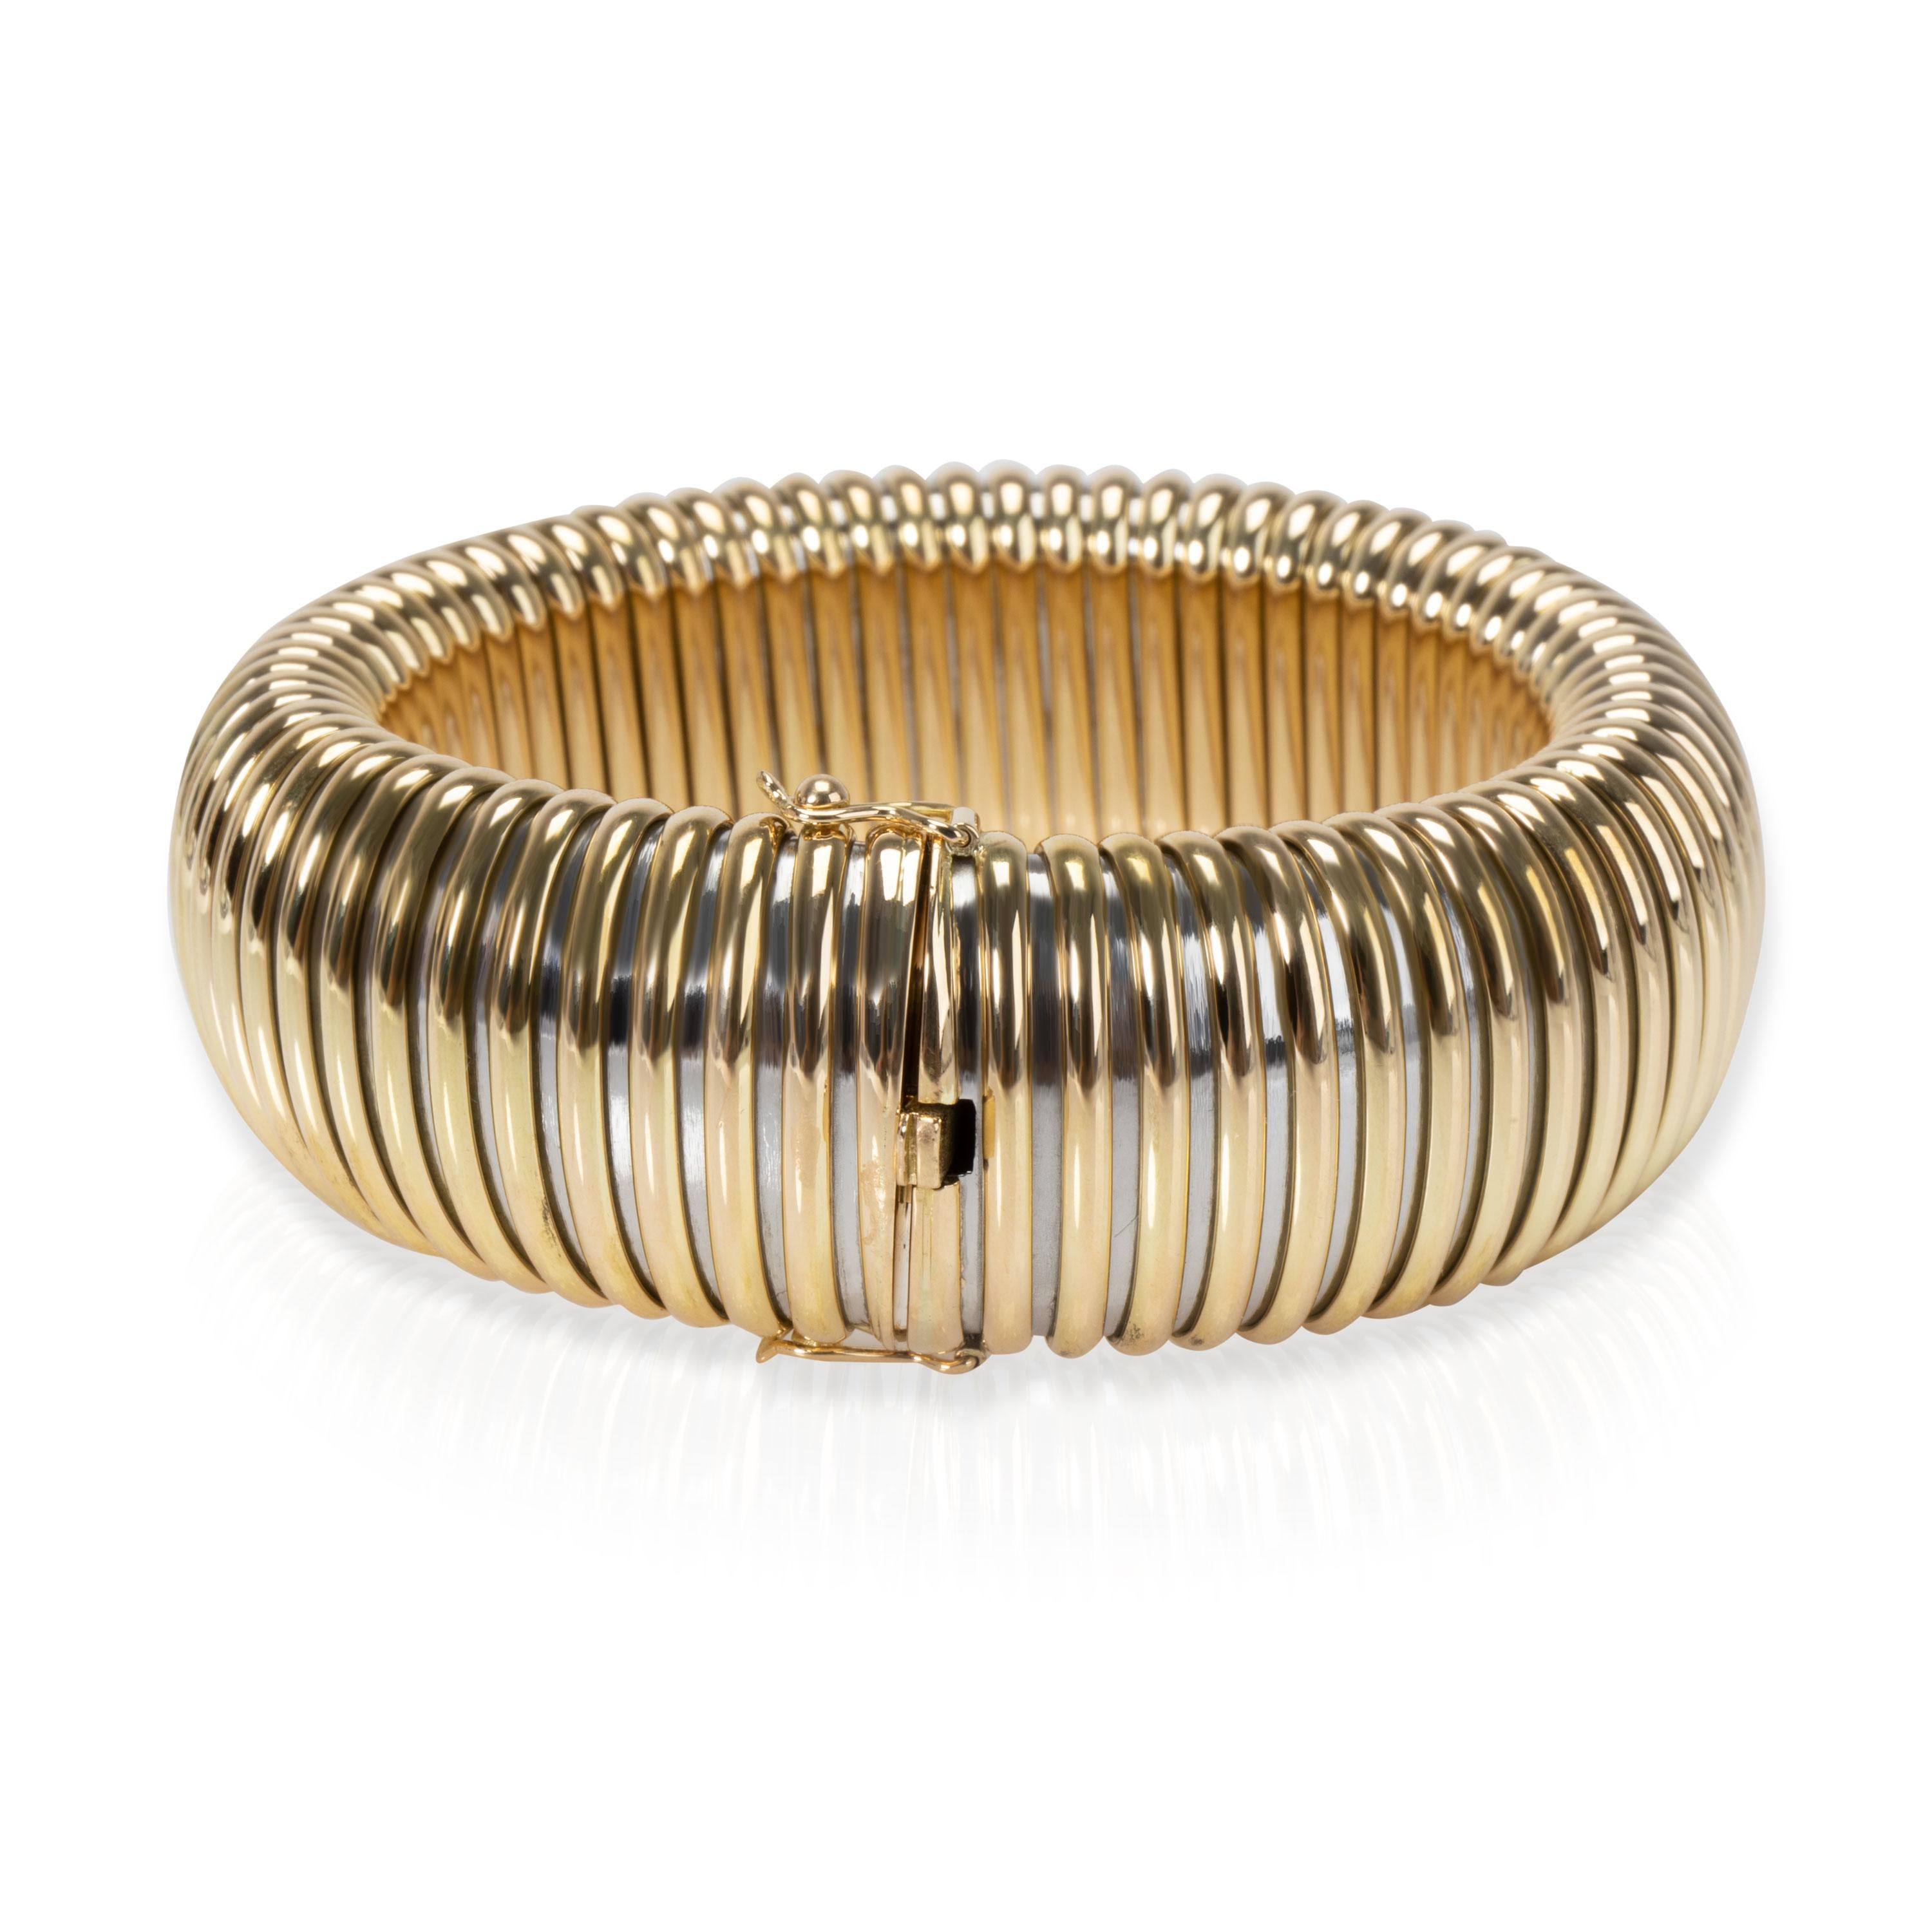 Cartier Tubogas Bracelet in 18K Yellow Gold & Stainless Steel

PRIMARY DETAILS
SKU: 105474

Condition Description: Retails for 15,000 USD. In excellent condition and recently polished. Bracelet is 
8 inches in length.

Brand: